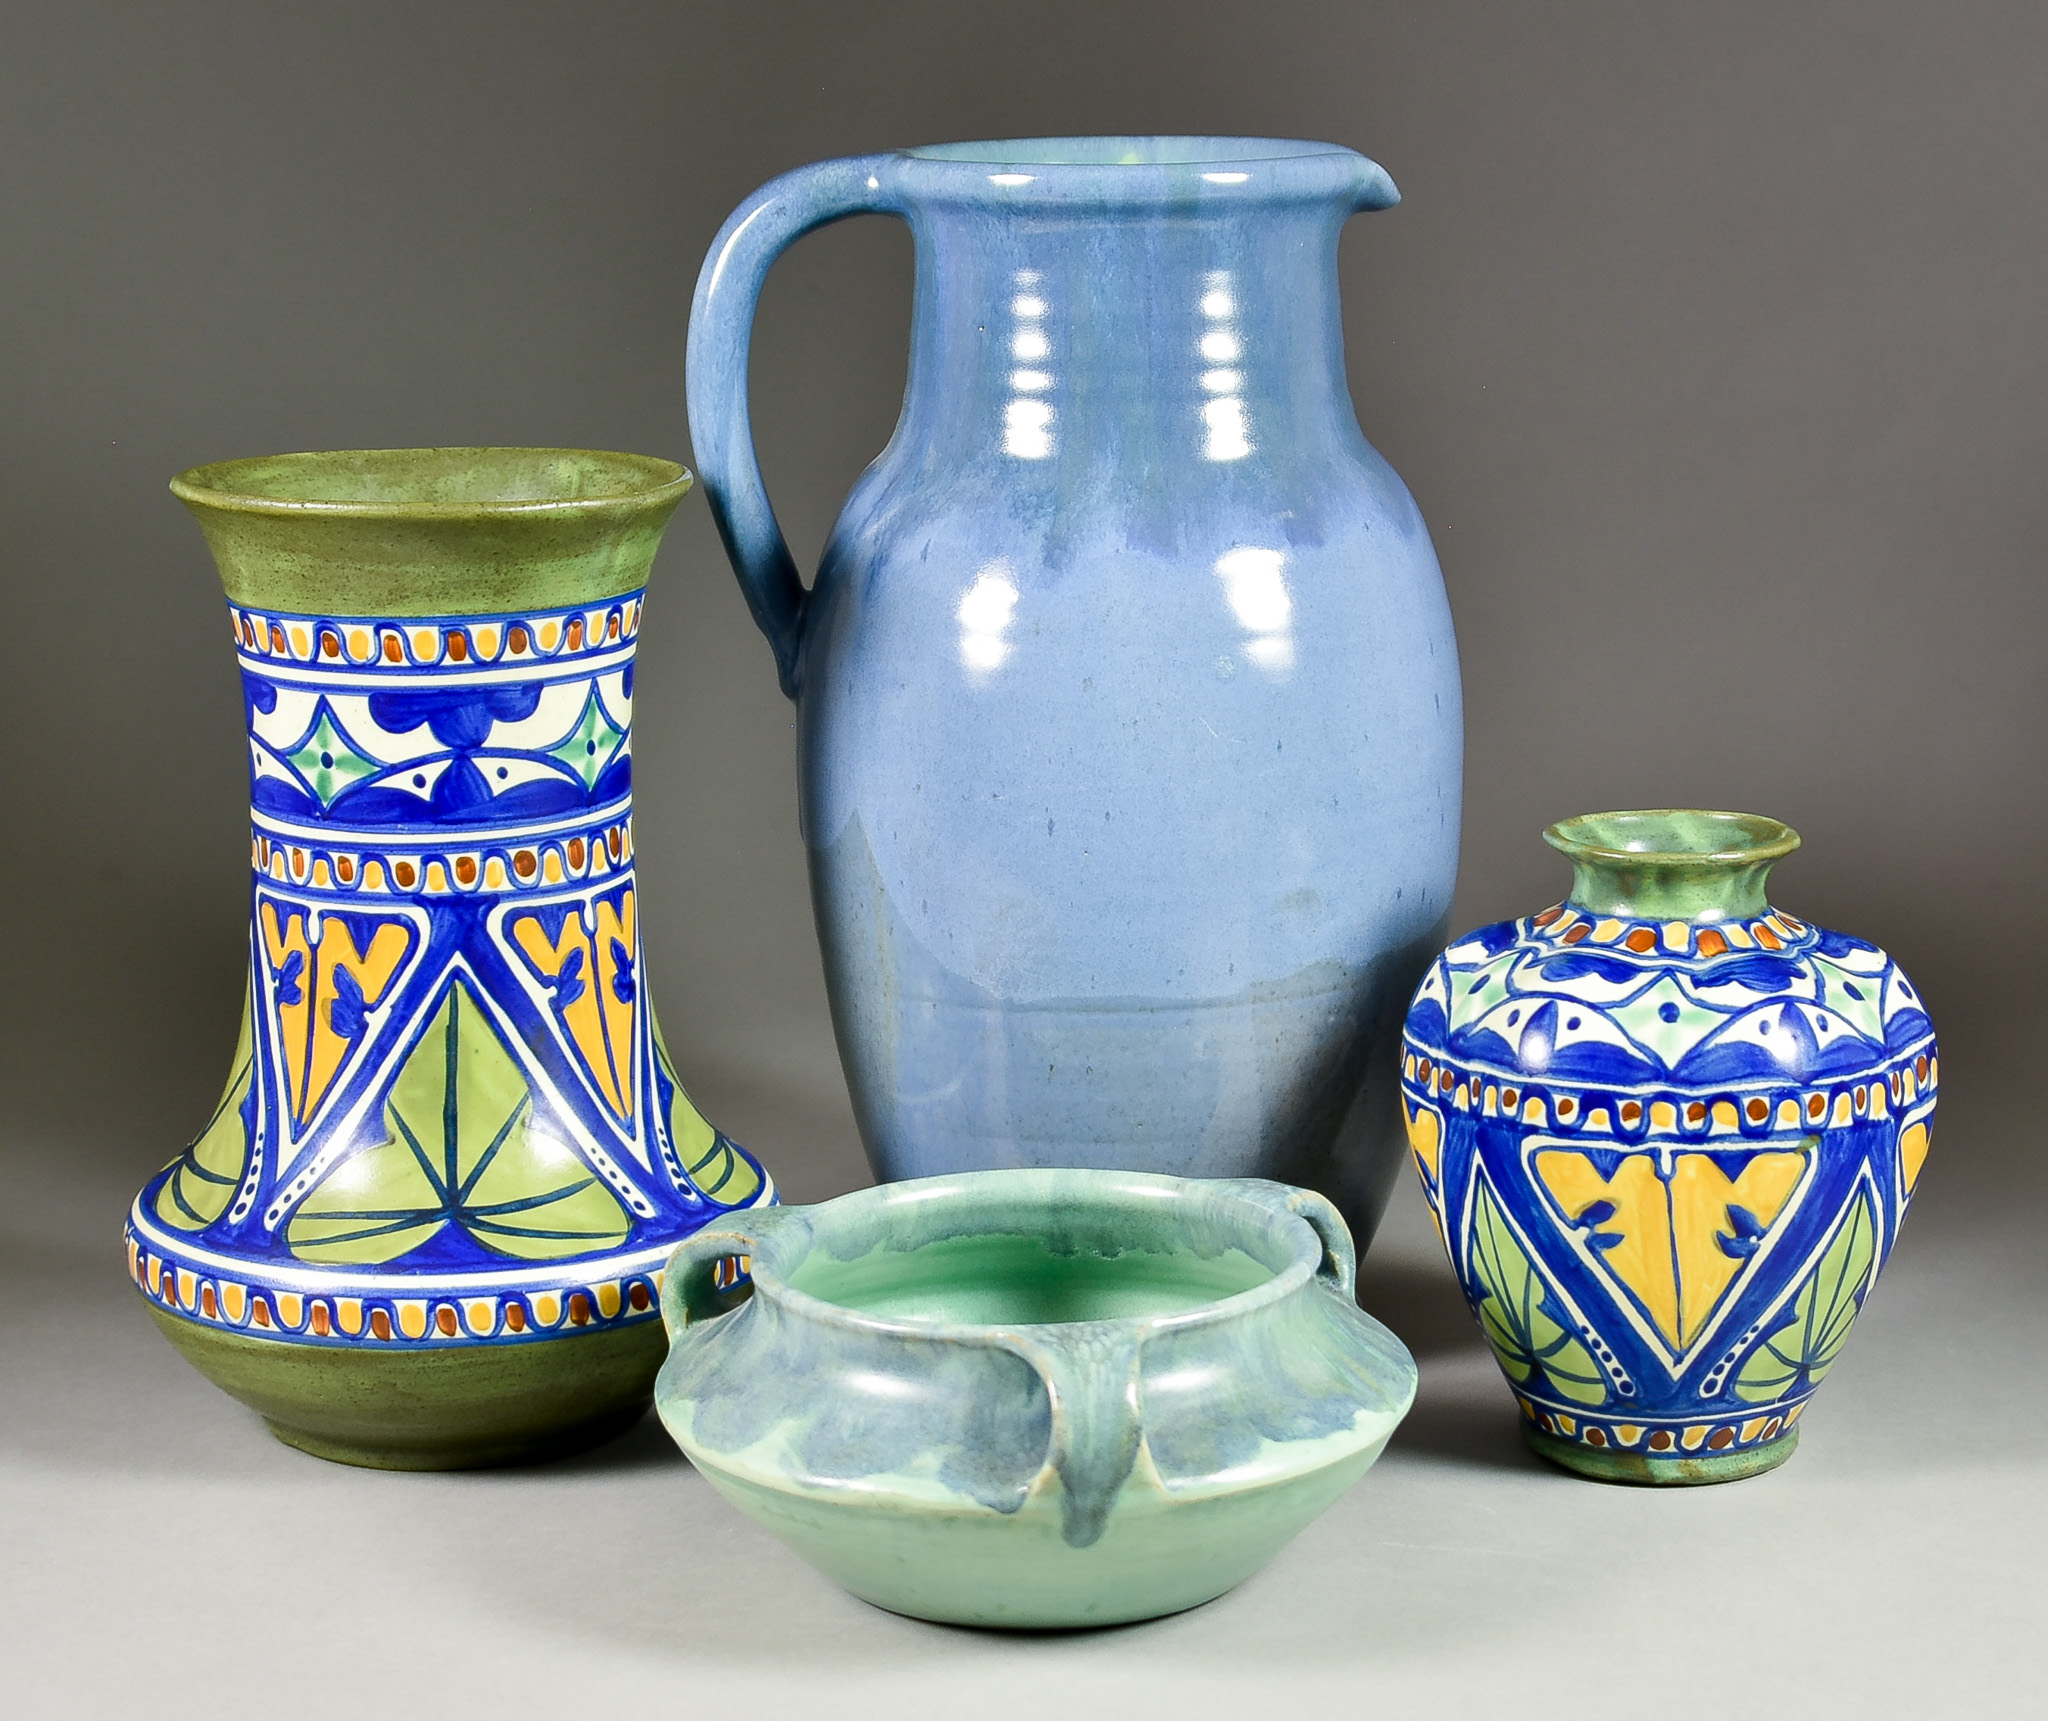 Two Hanley Design Vases and Two Pieces of Upchurch Pottery, 20th Century, the Hanley vases by